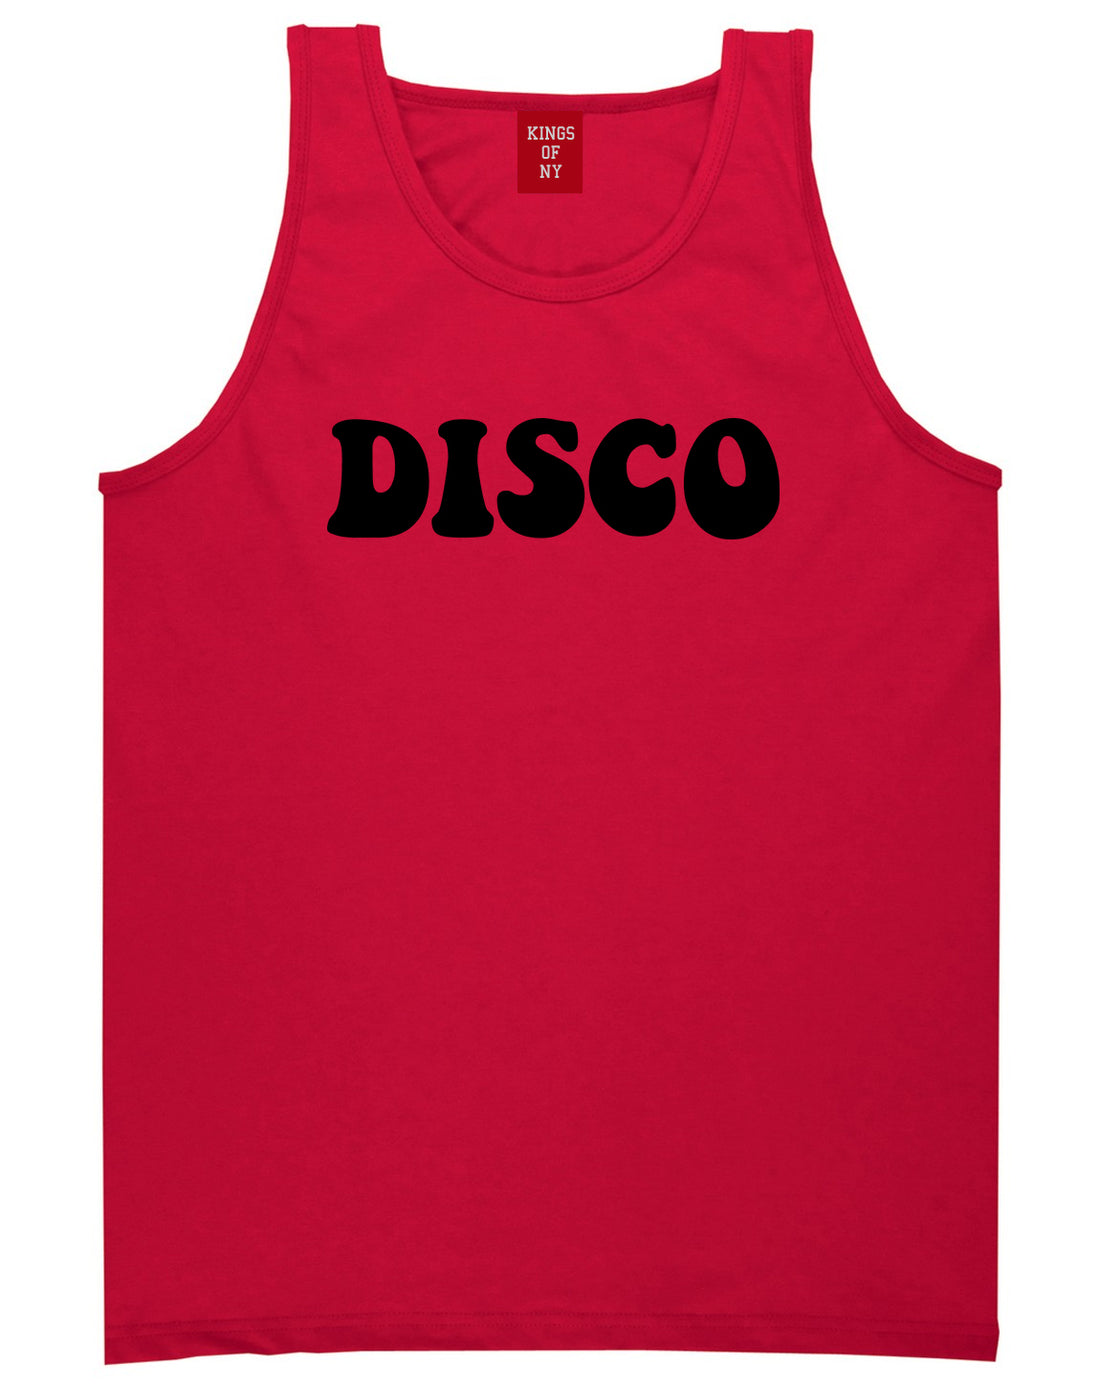 Disco_Music Mens Red Tank Top Shirt by Kings Of NY